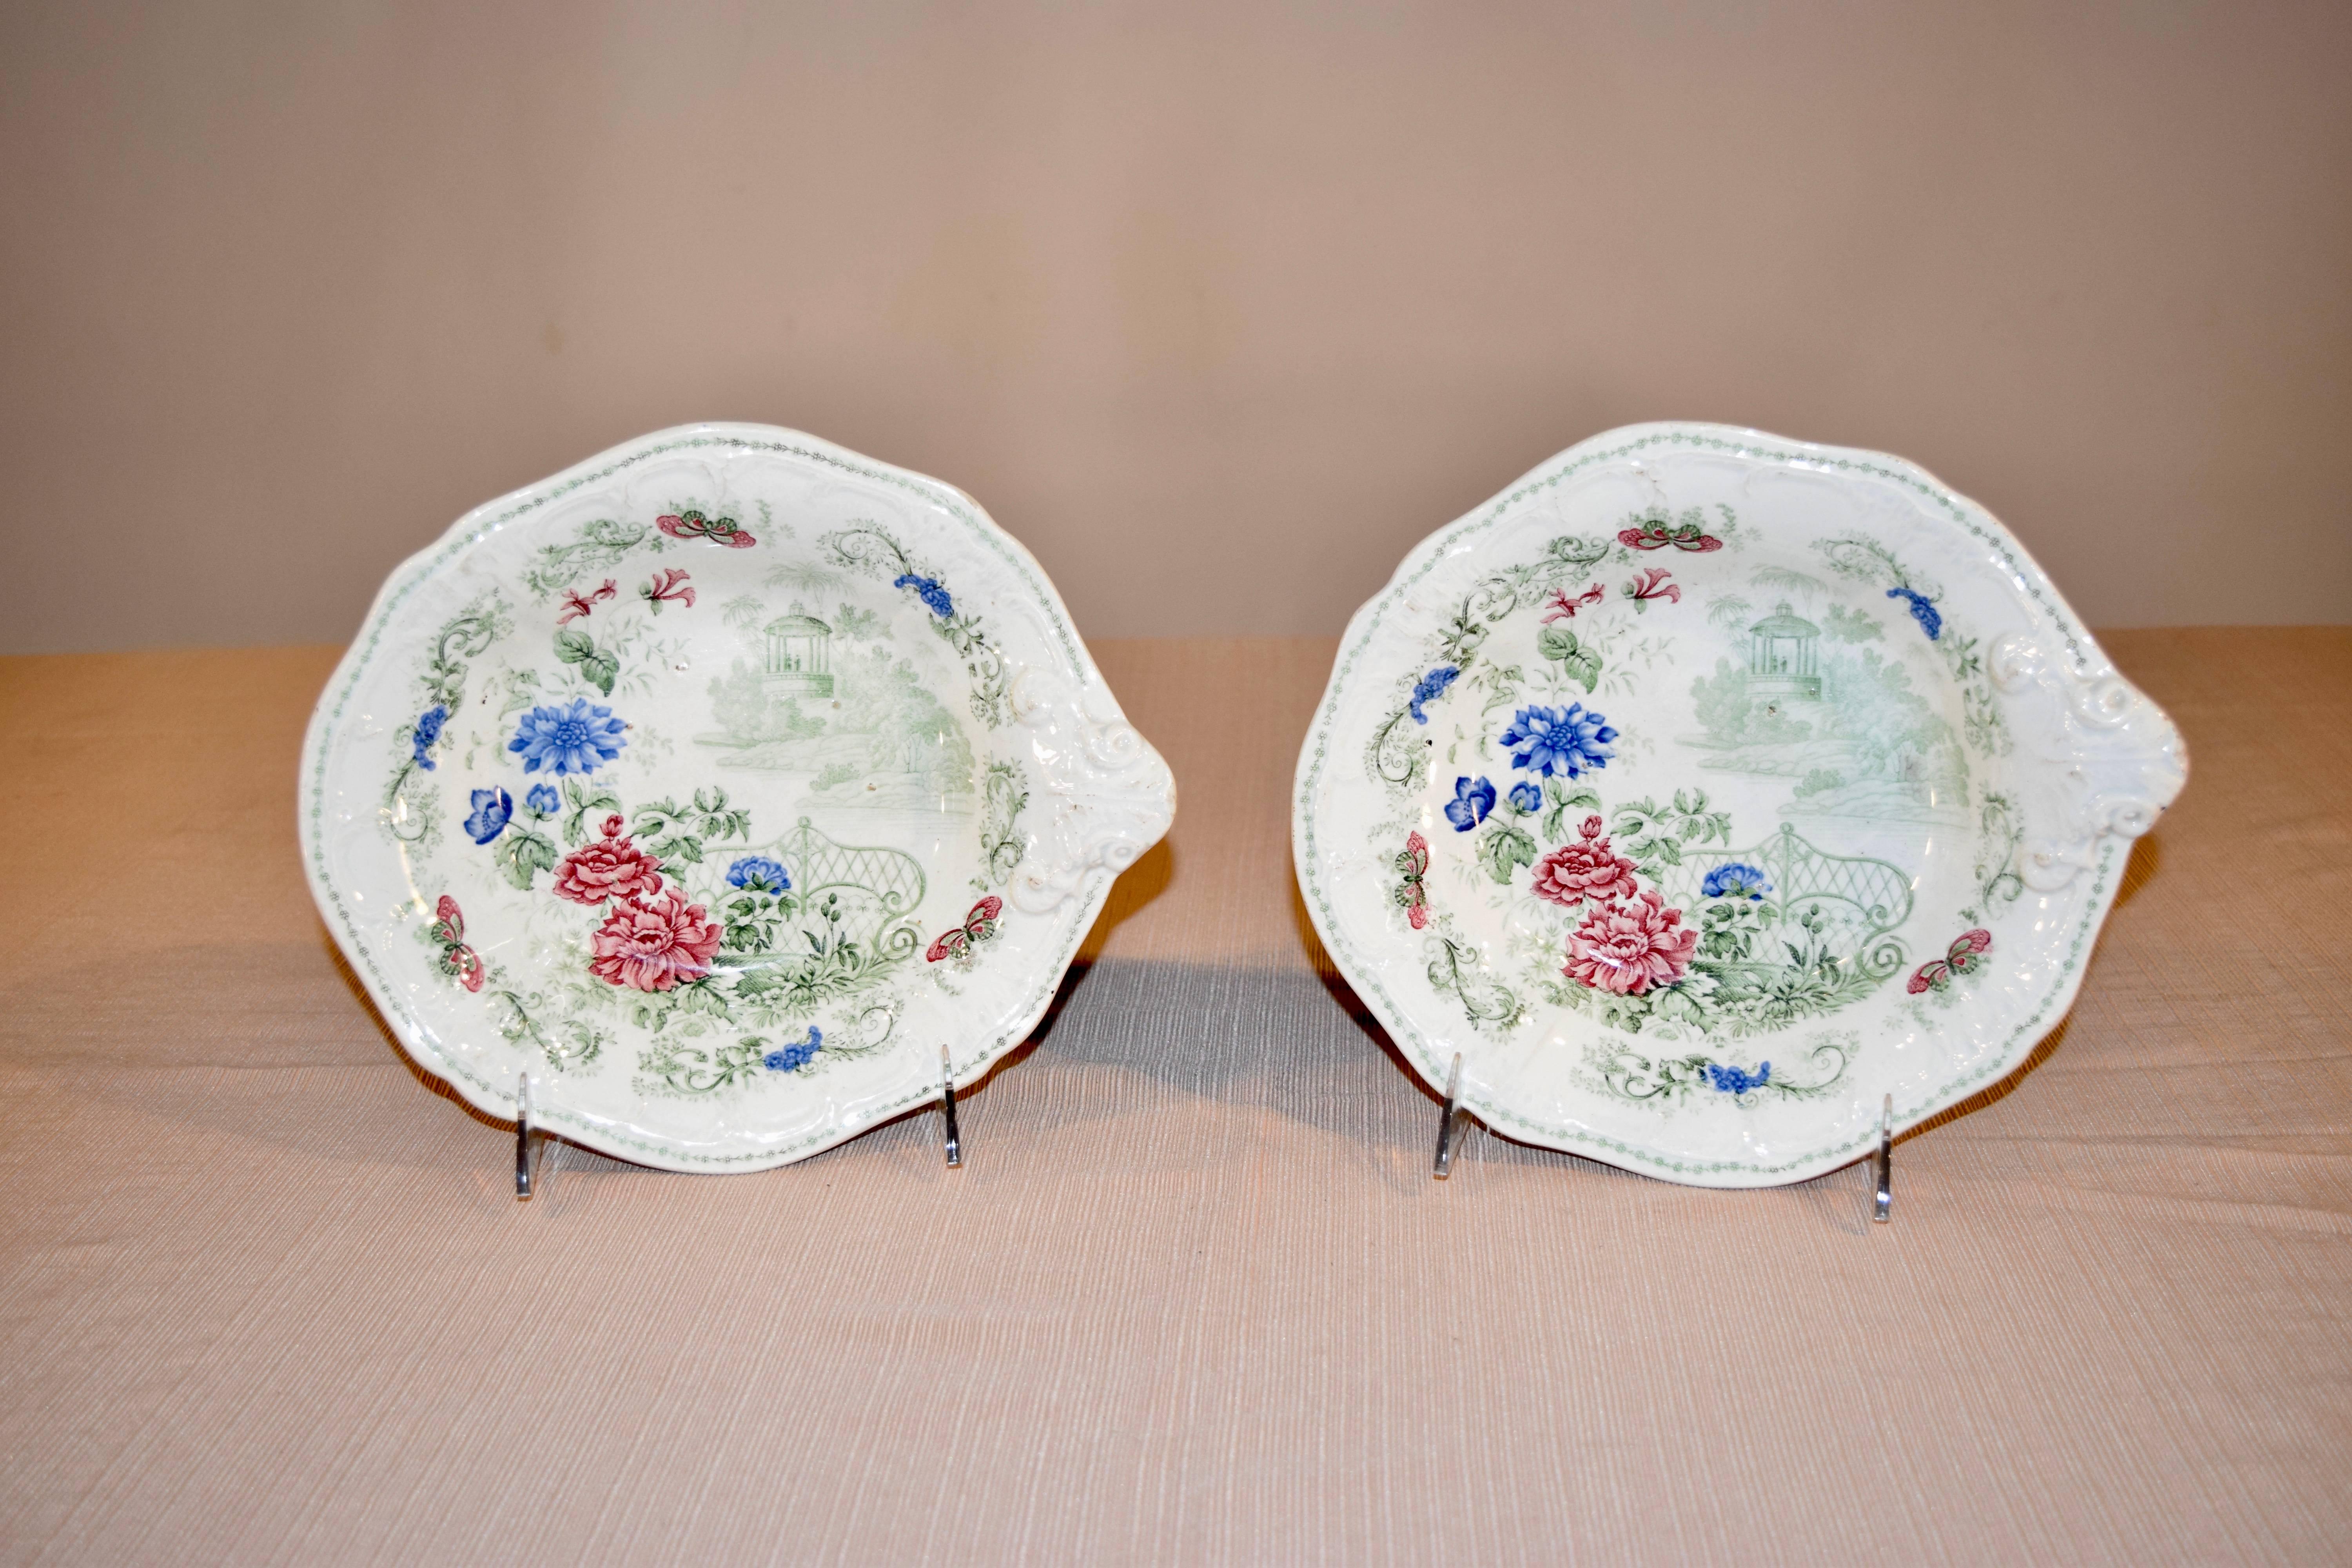 Pair of 19th century dishes with multicolored transfer decoration depicting a garden with florals and butterflies in vibrant color. Marked 